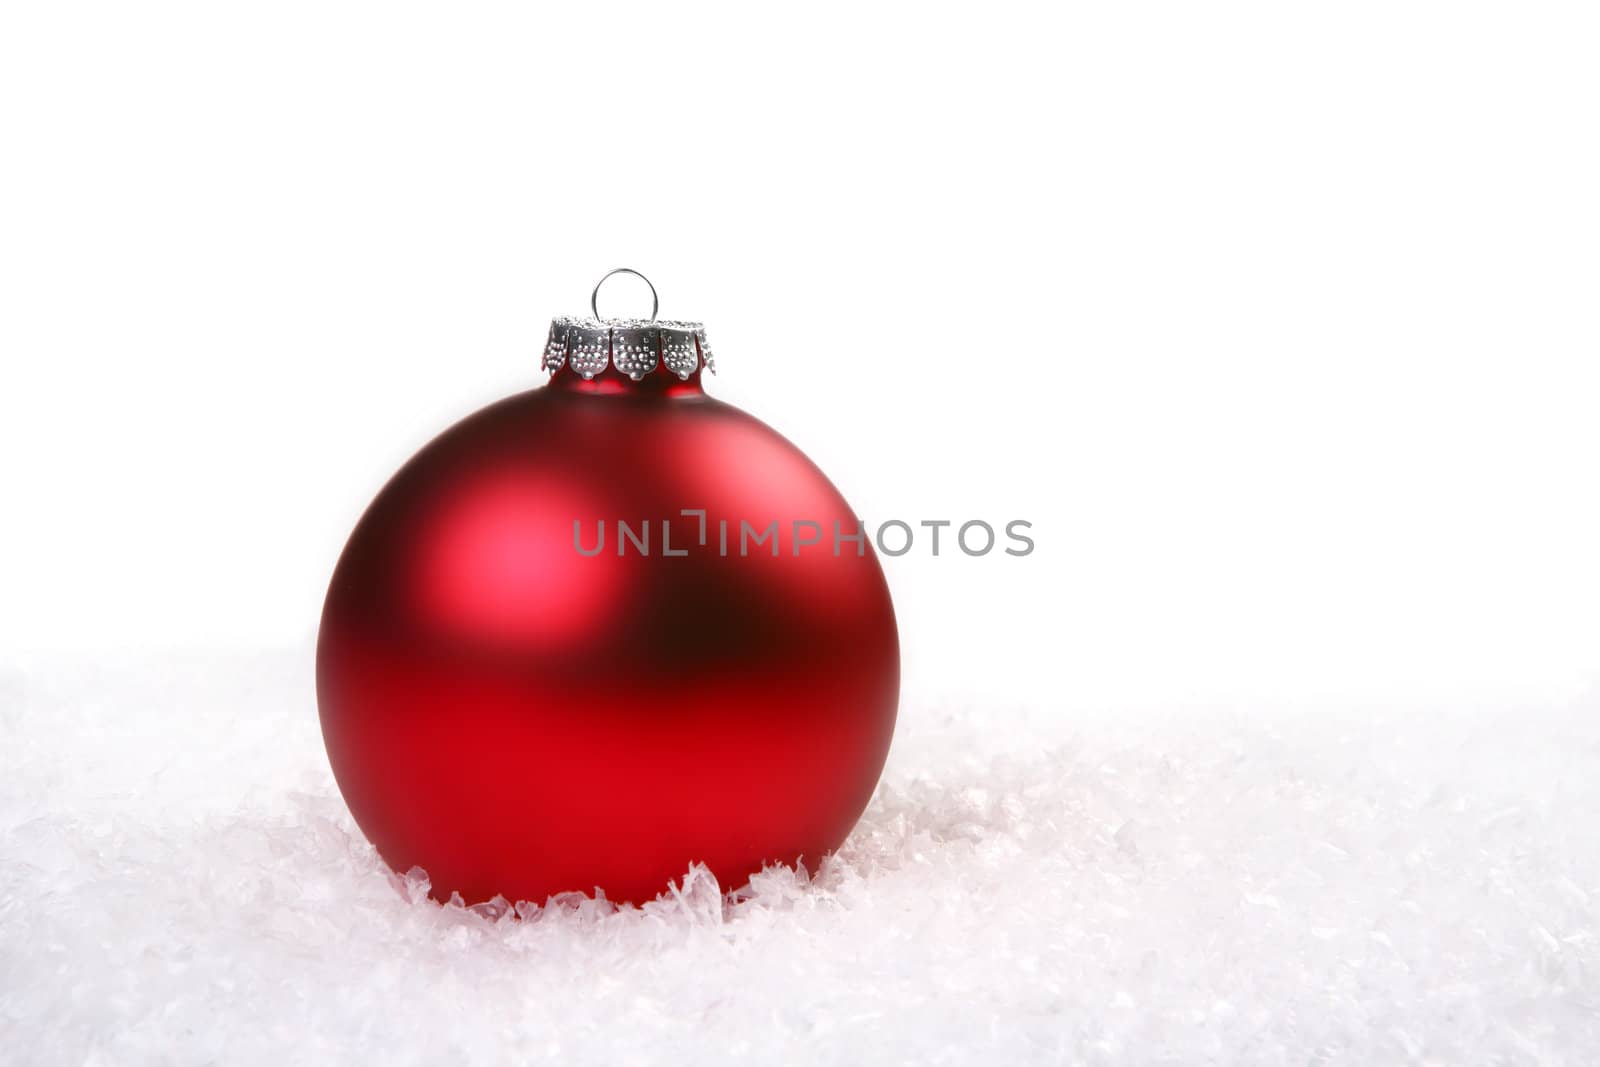 Single Red Shiny Christmas Ornament in the Snow With Copyspace